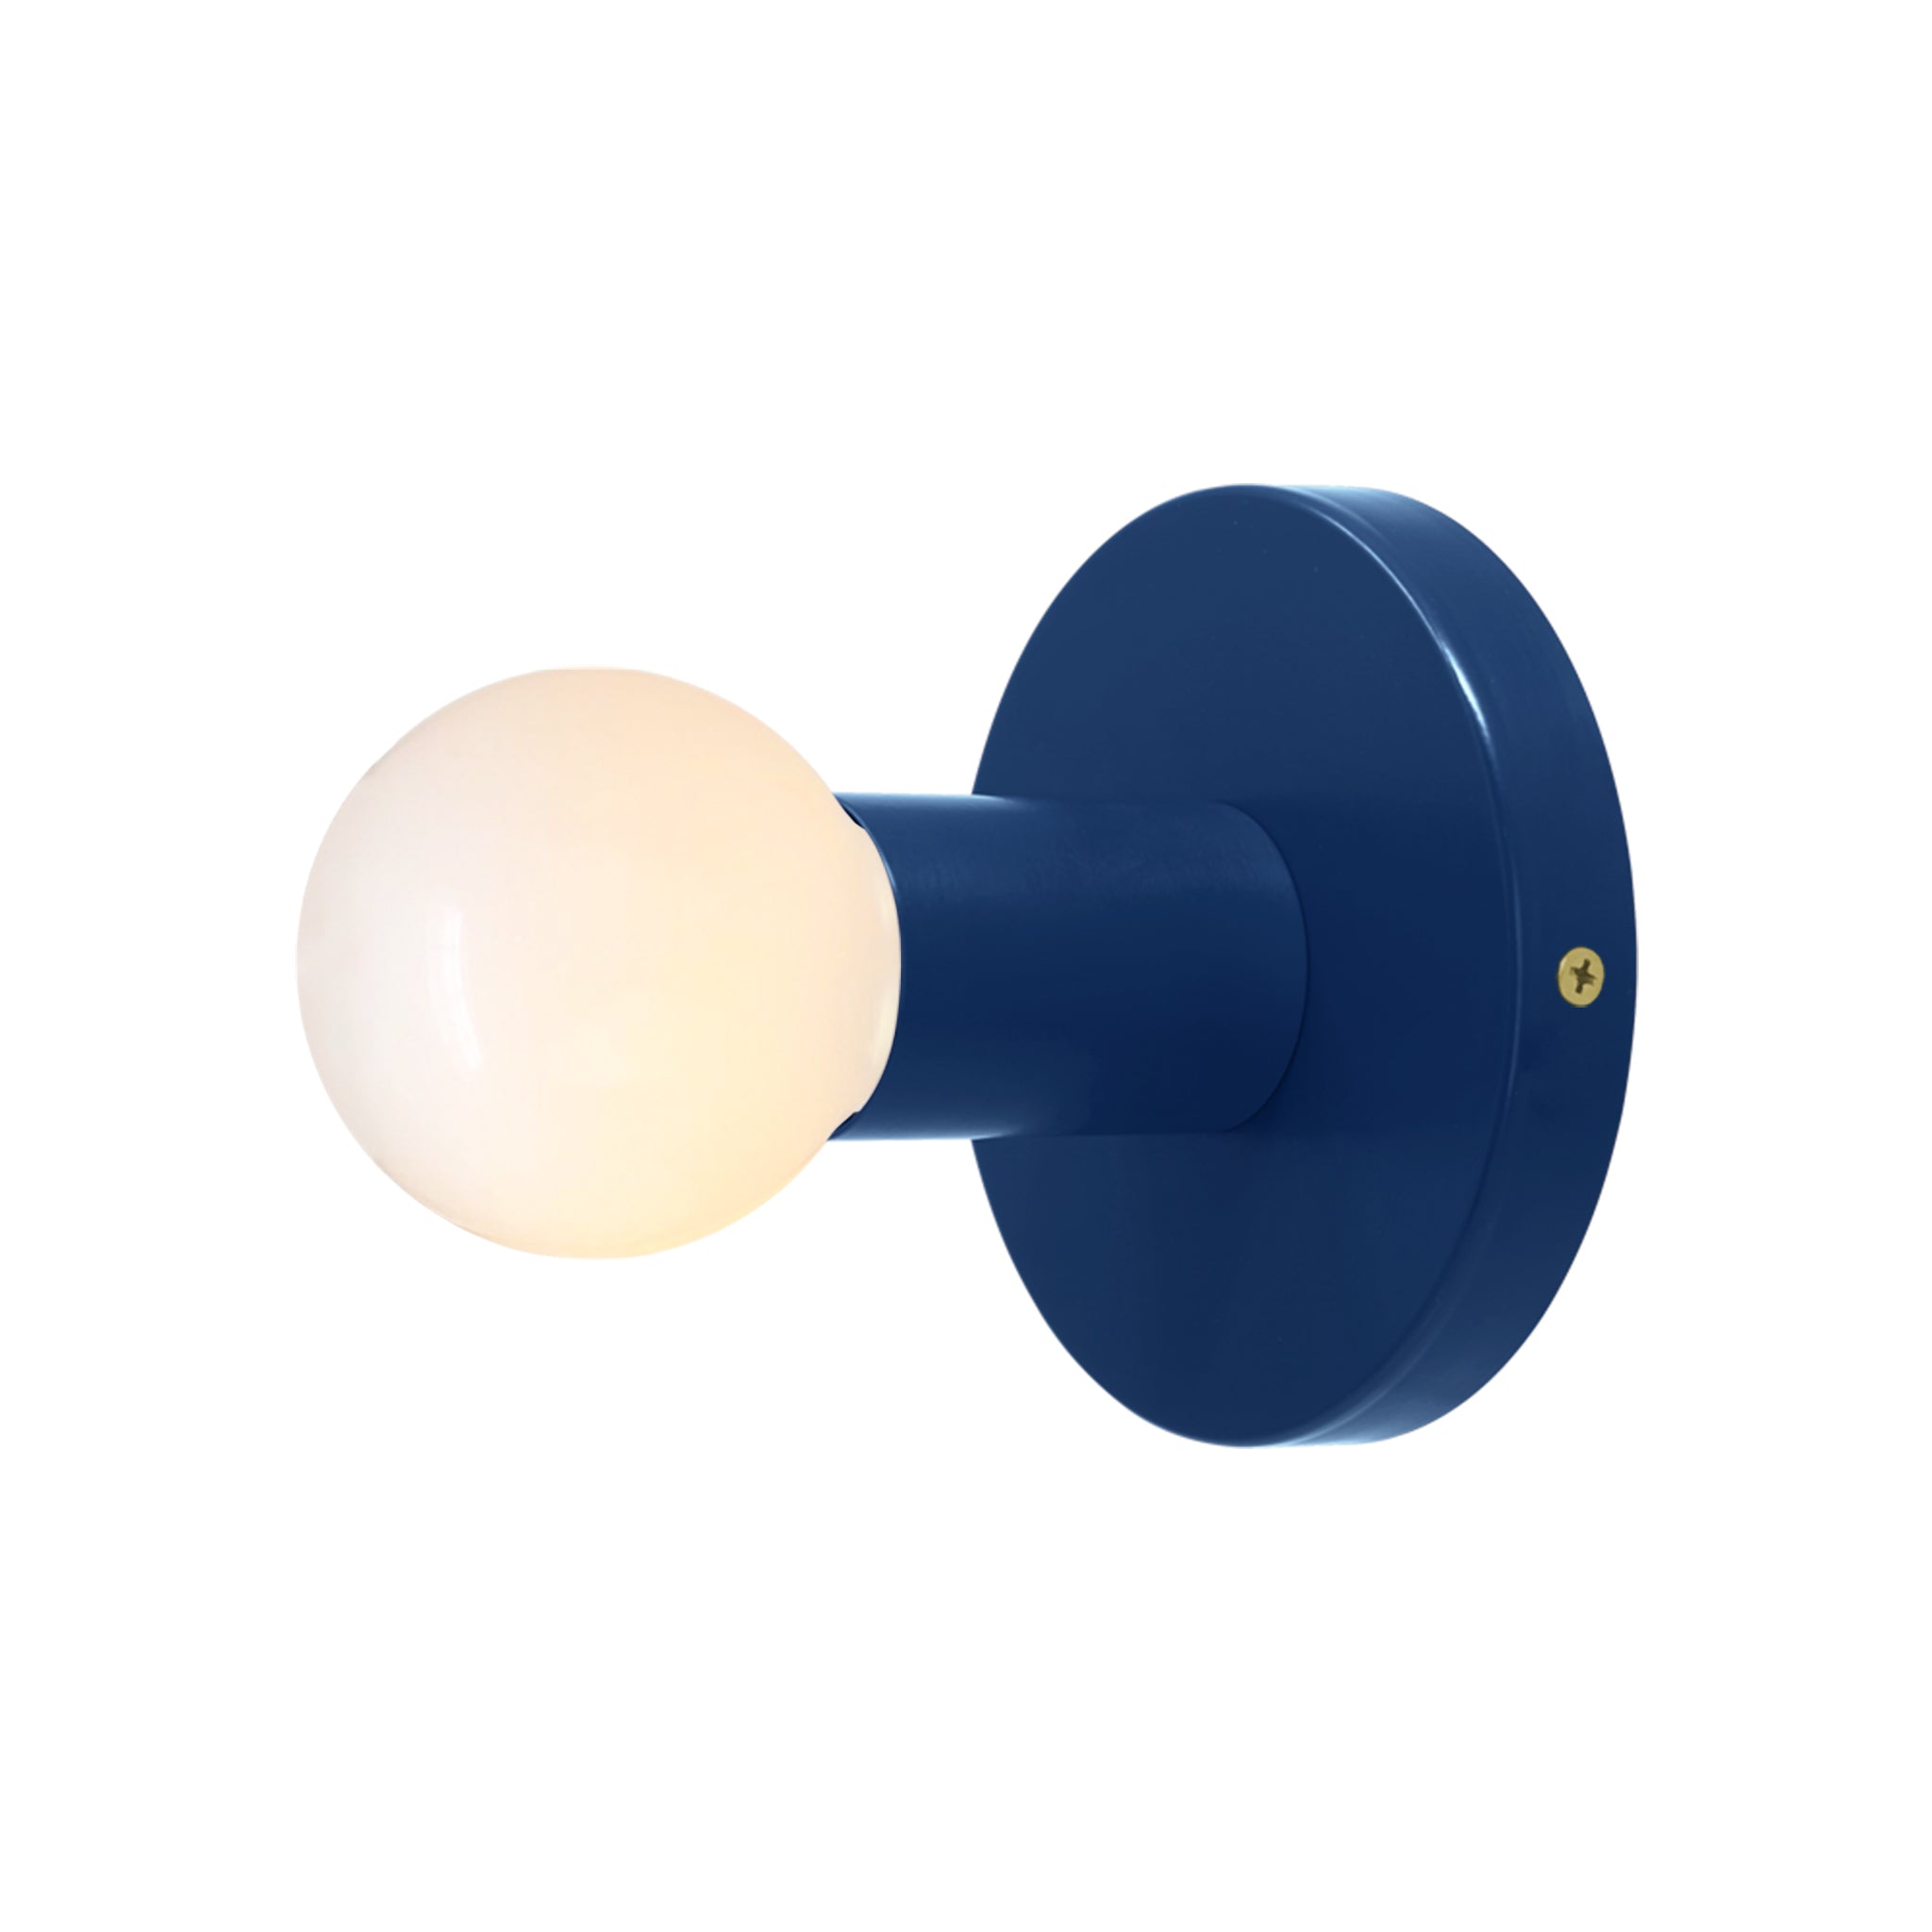 Brass and cobalt color Twink sconce Dutton Brown lighting